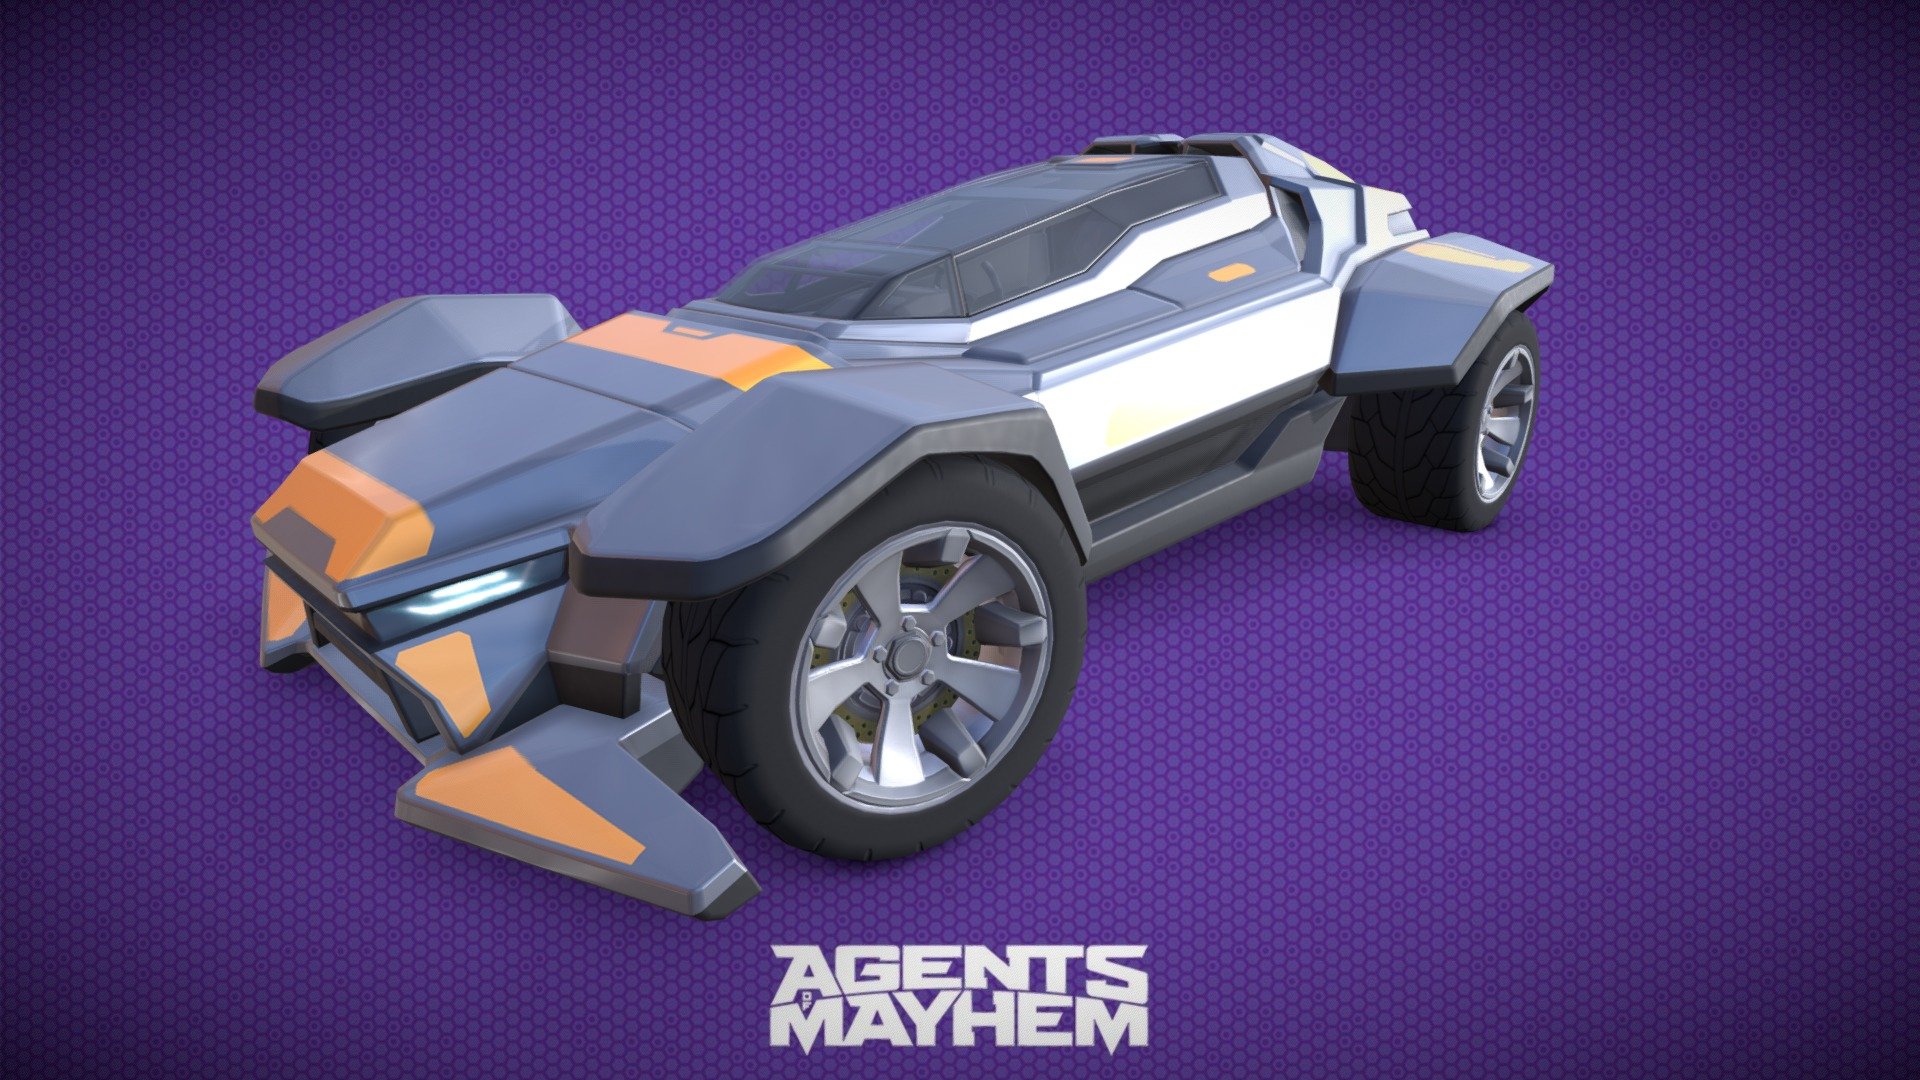 Agent Light Sport vehicle modeled for the Agents of Mayhem game from concepts 3d model